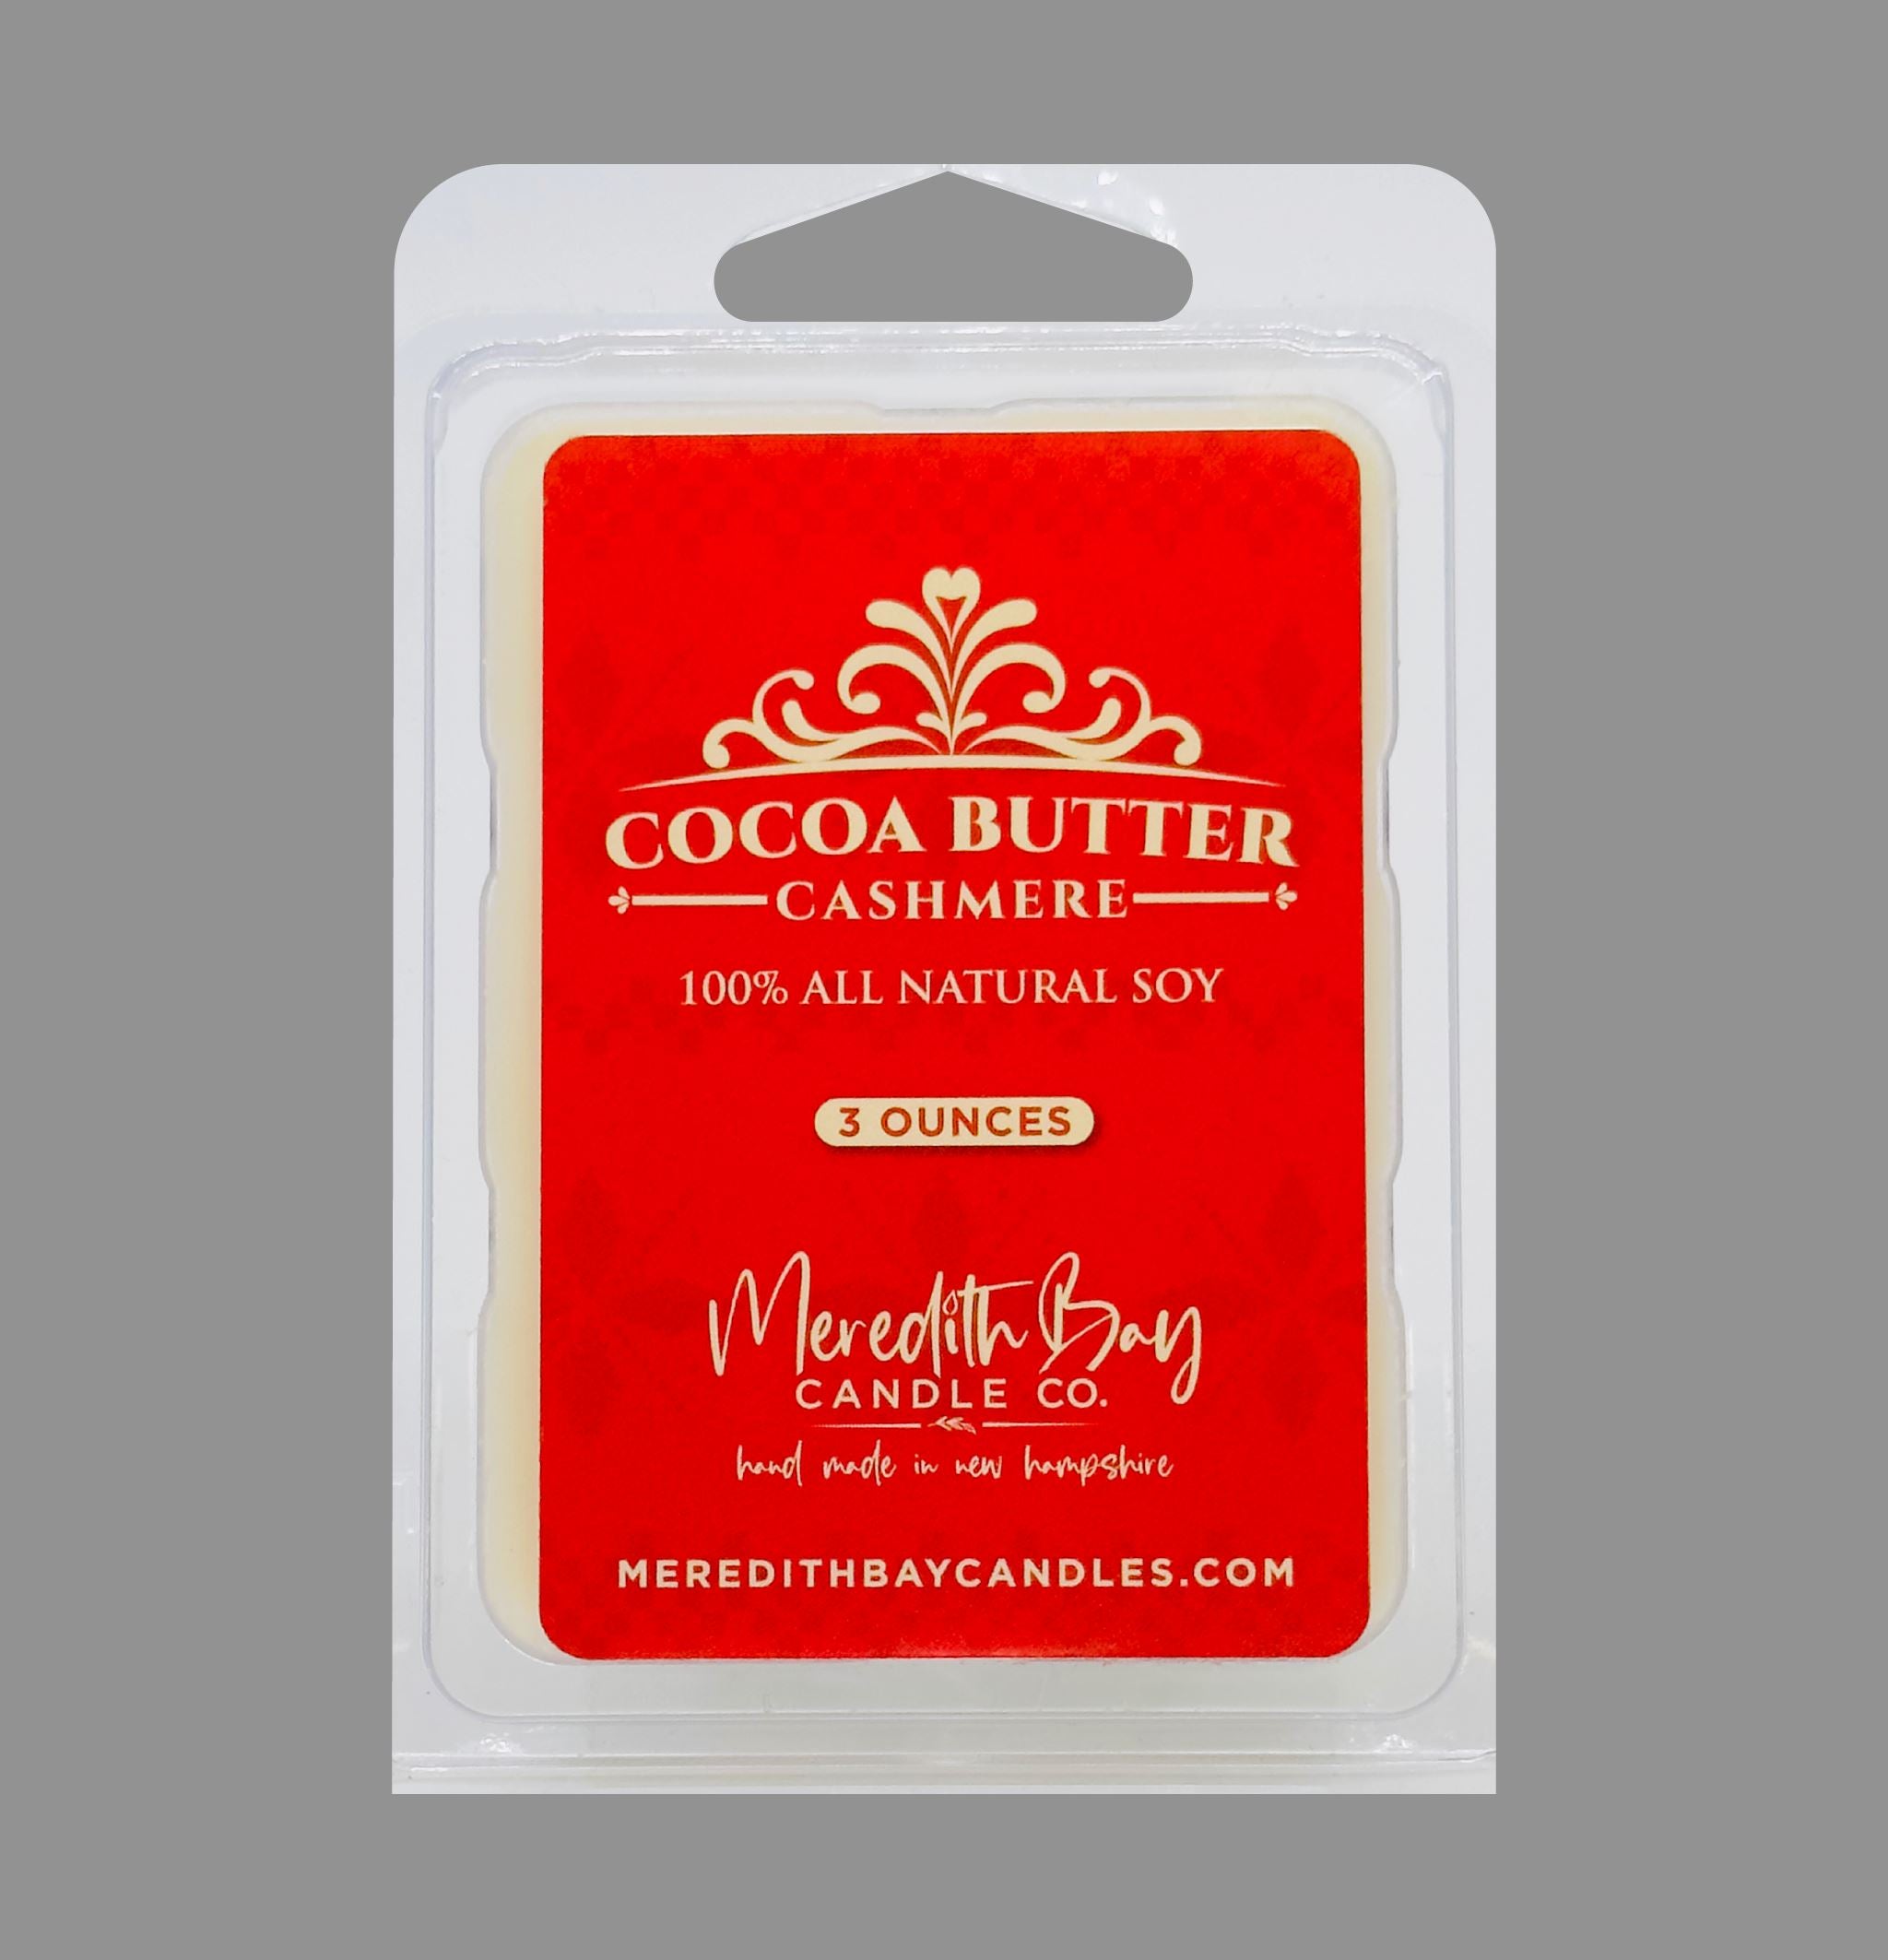 Cocoa Butter Cashmere Wax Melt Meredith Bay Candle Co 